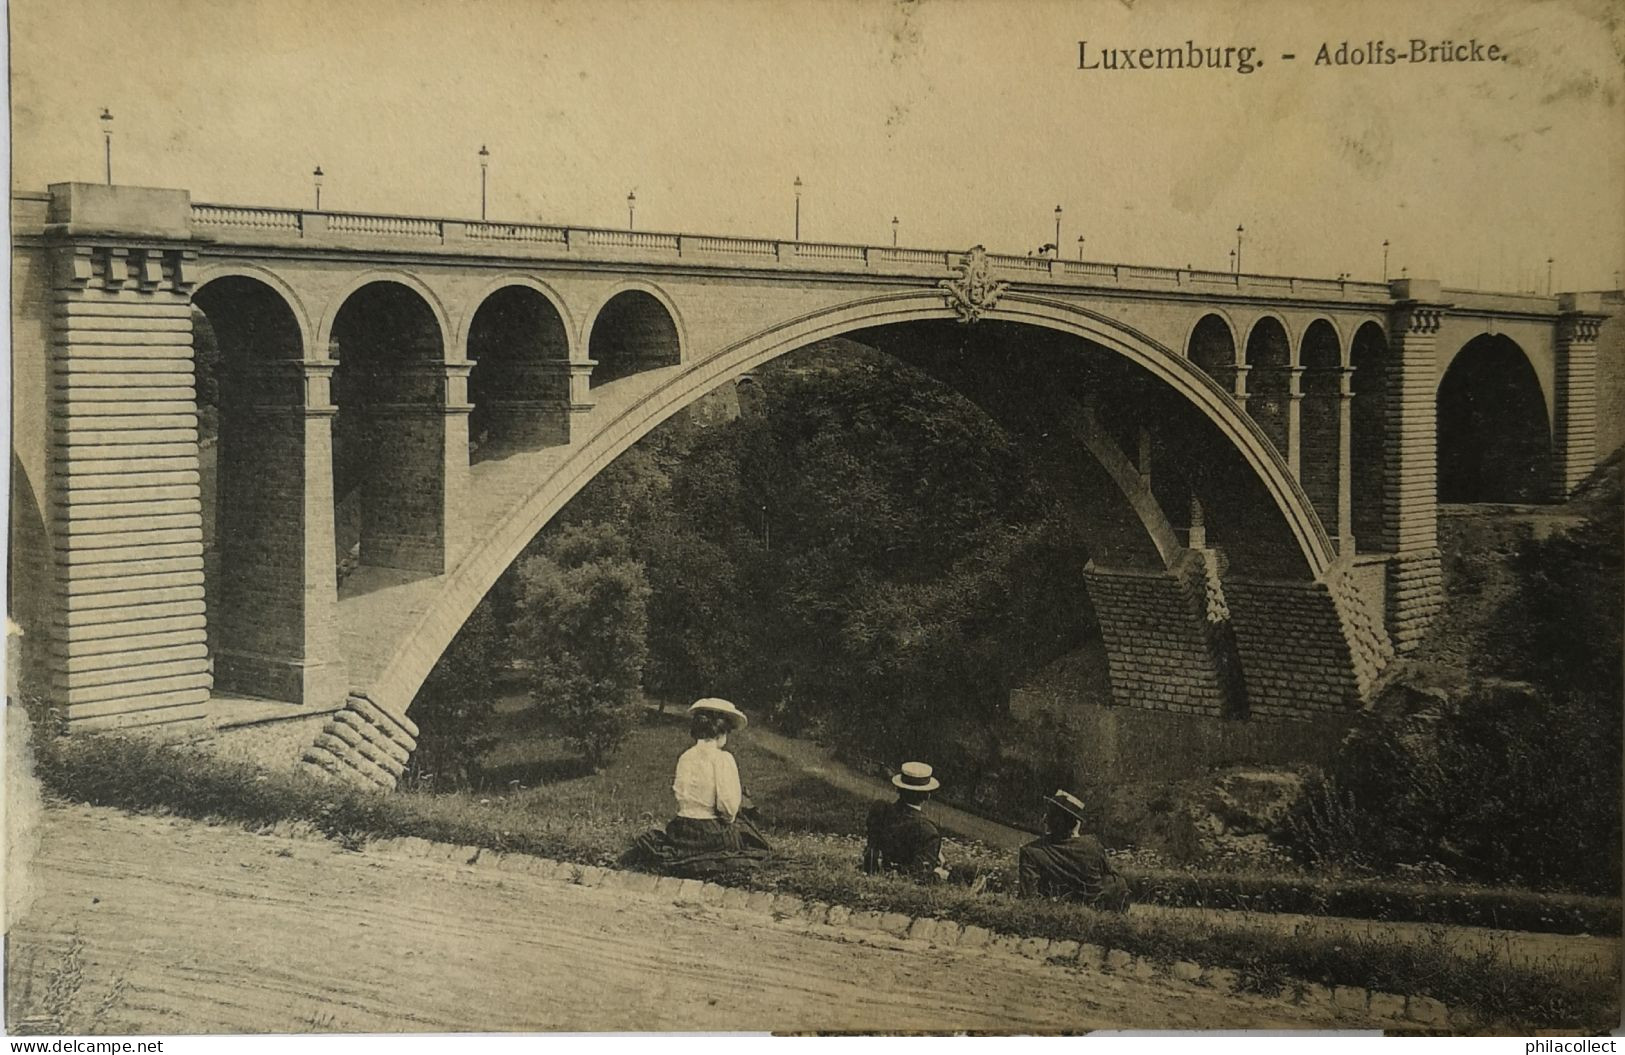 Luxembourg   (Luxembourg) Adolfs Brucke  19?? - Luxembourg - Ville